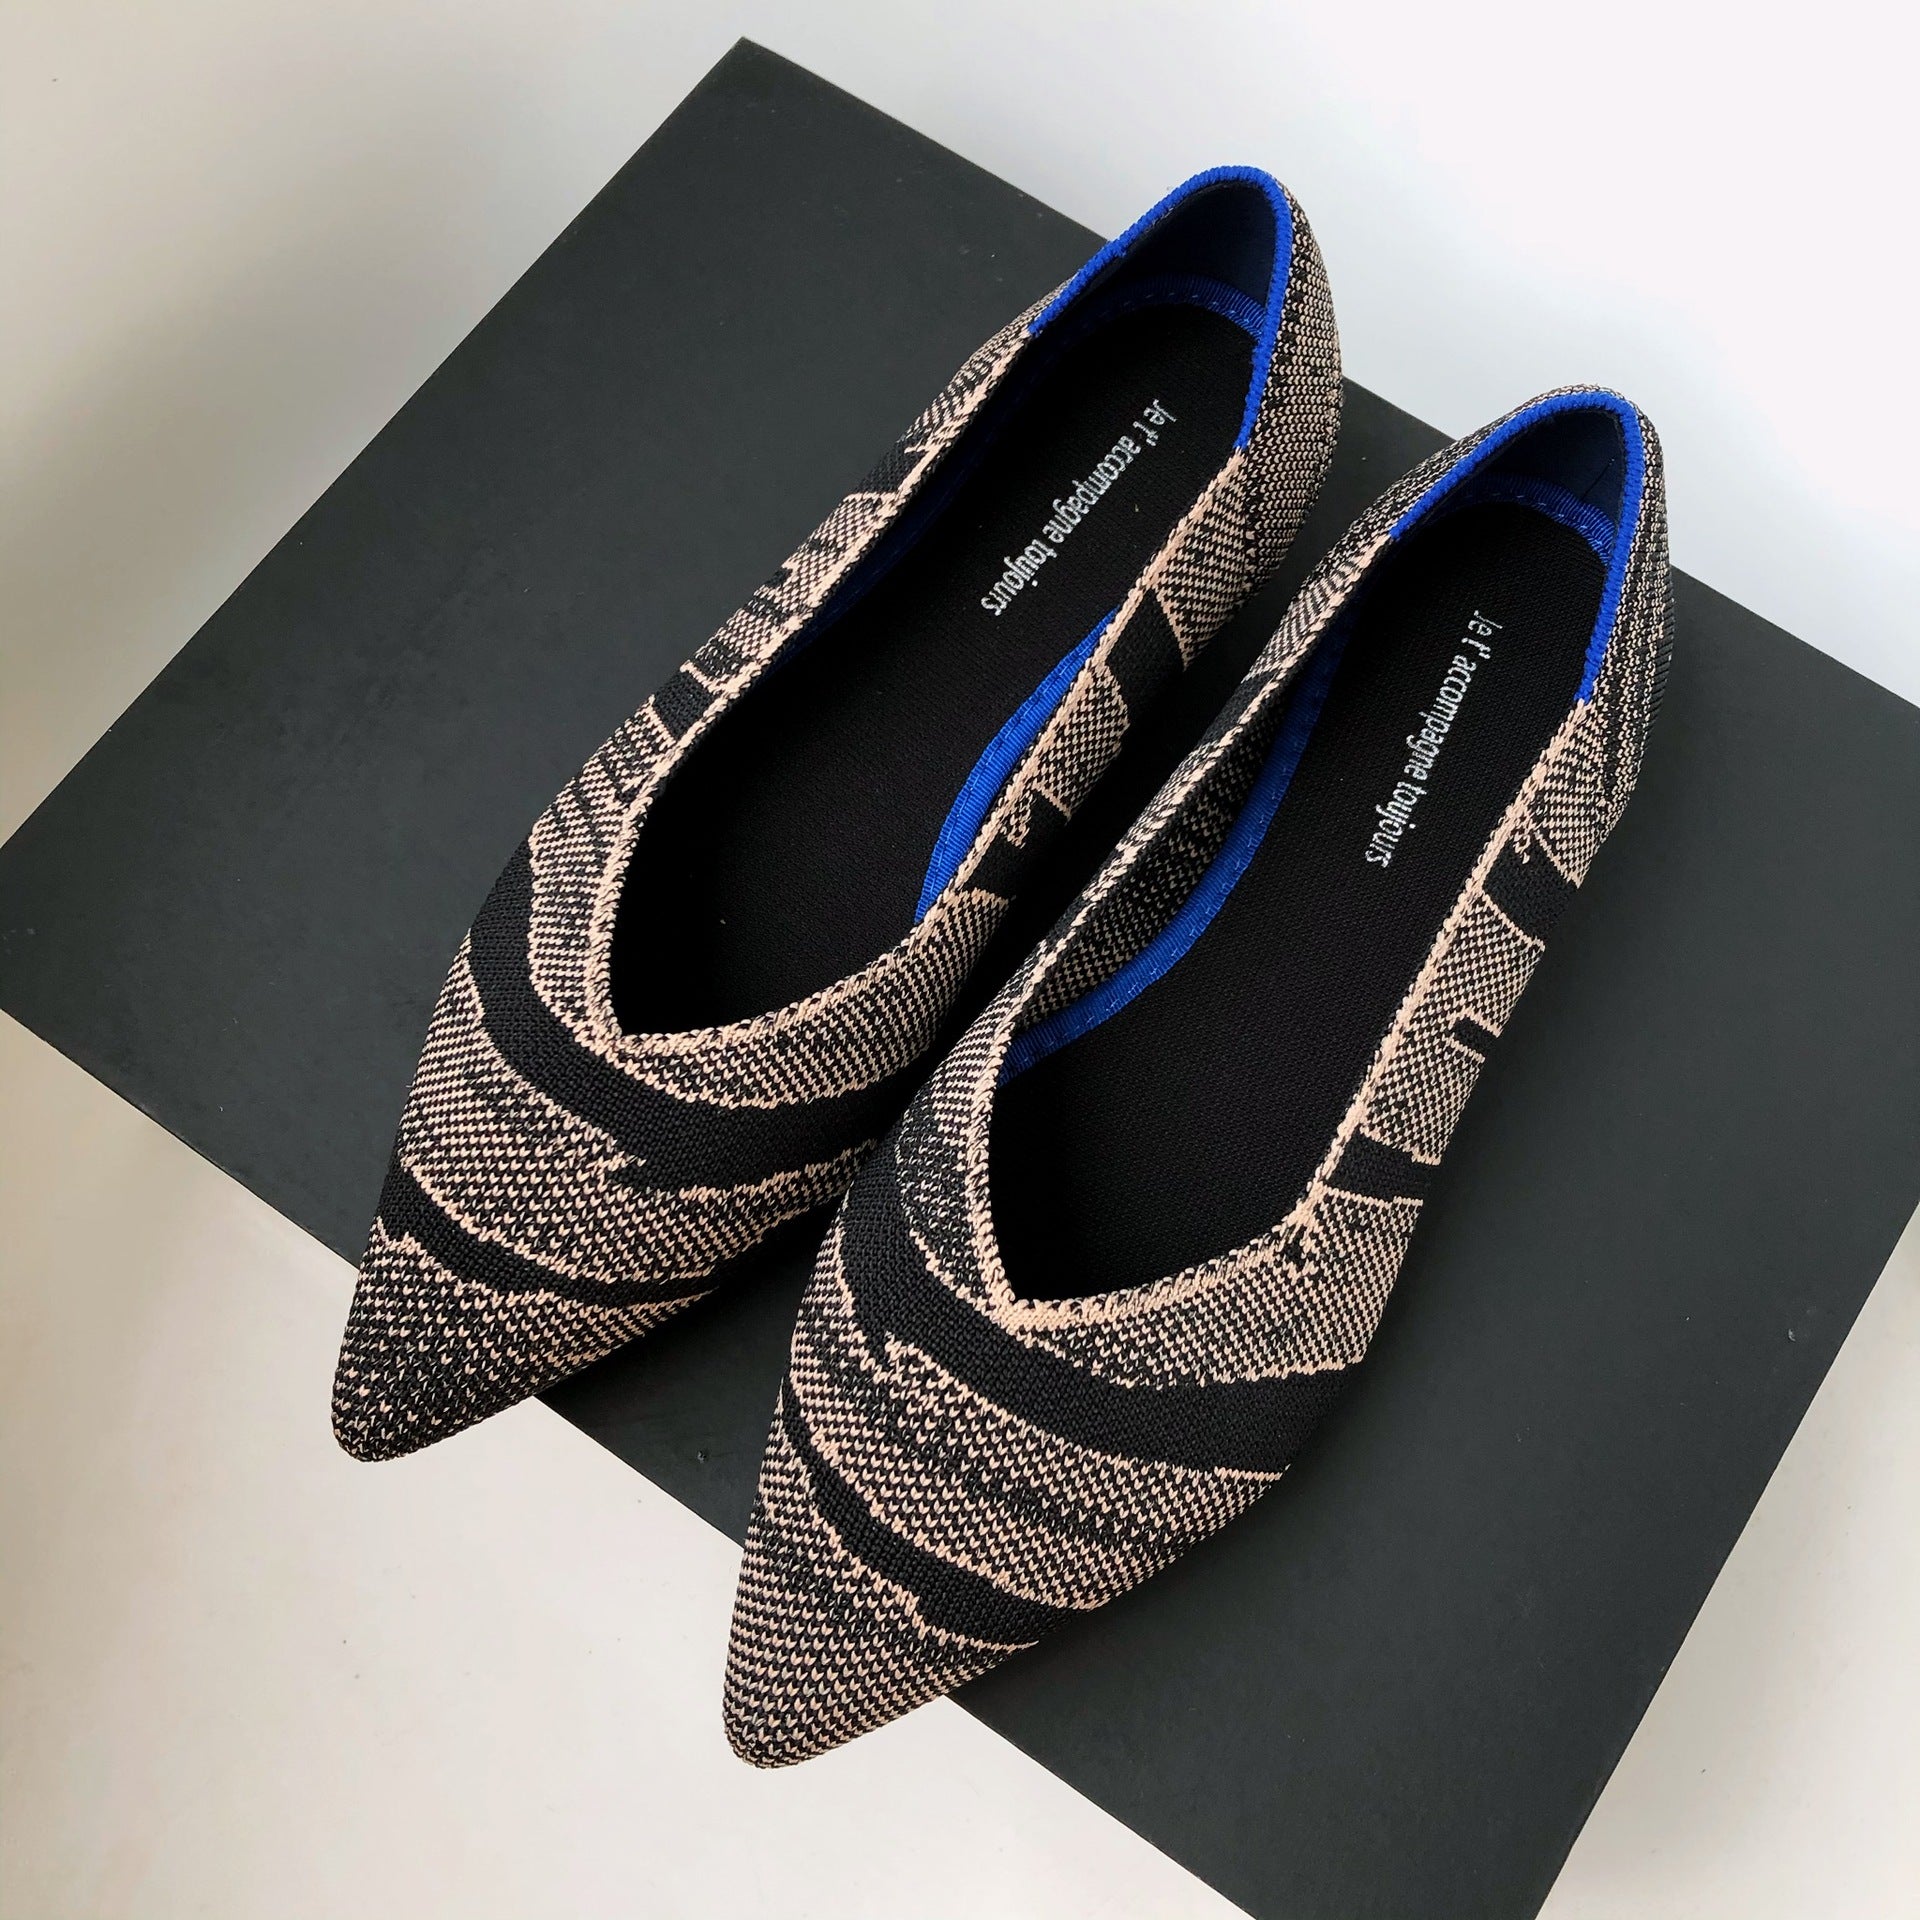 Women's Pointed Toe Casual Woven Flat Shoes - Luxury Look